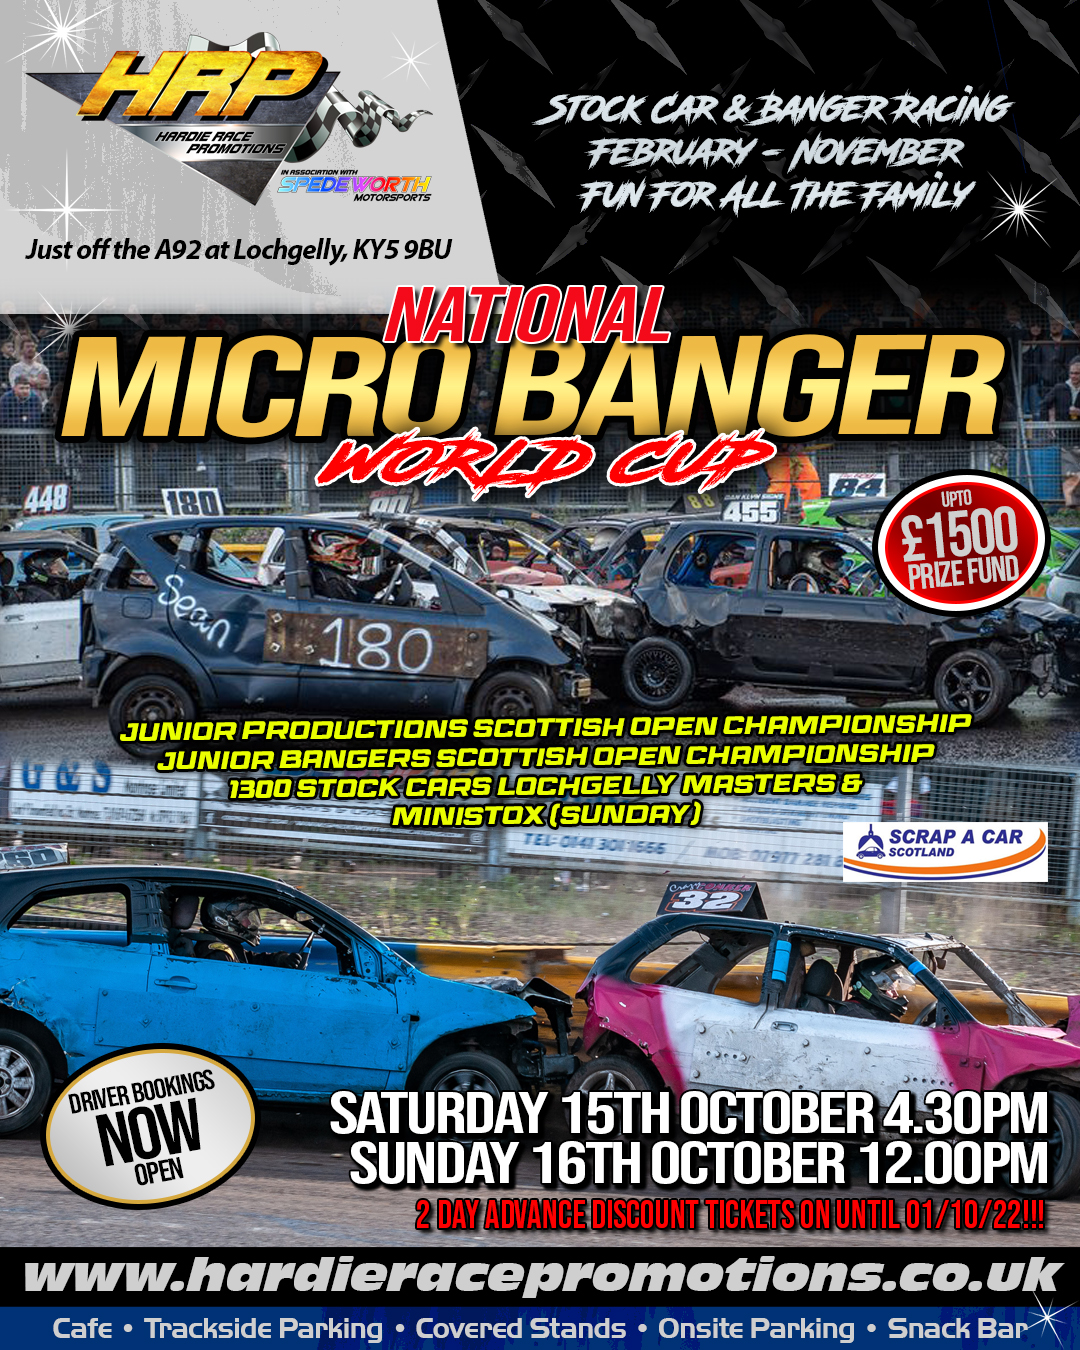 Micro Banger World Cup Weekend